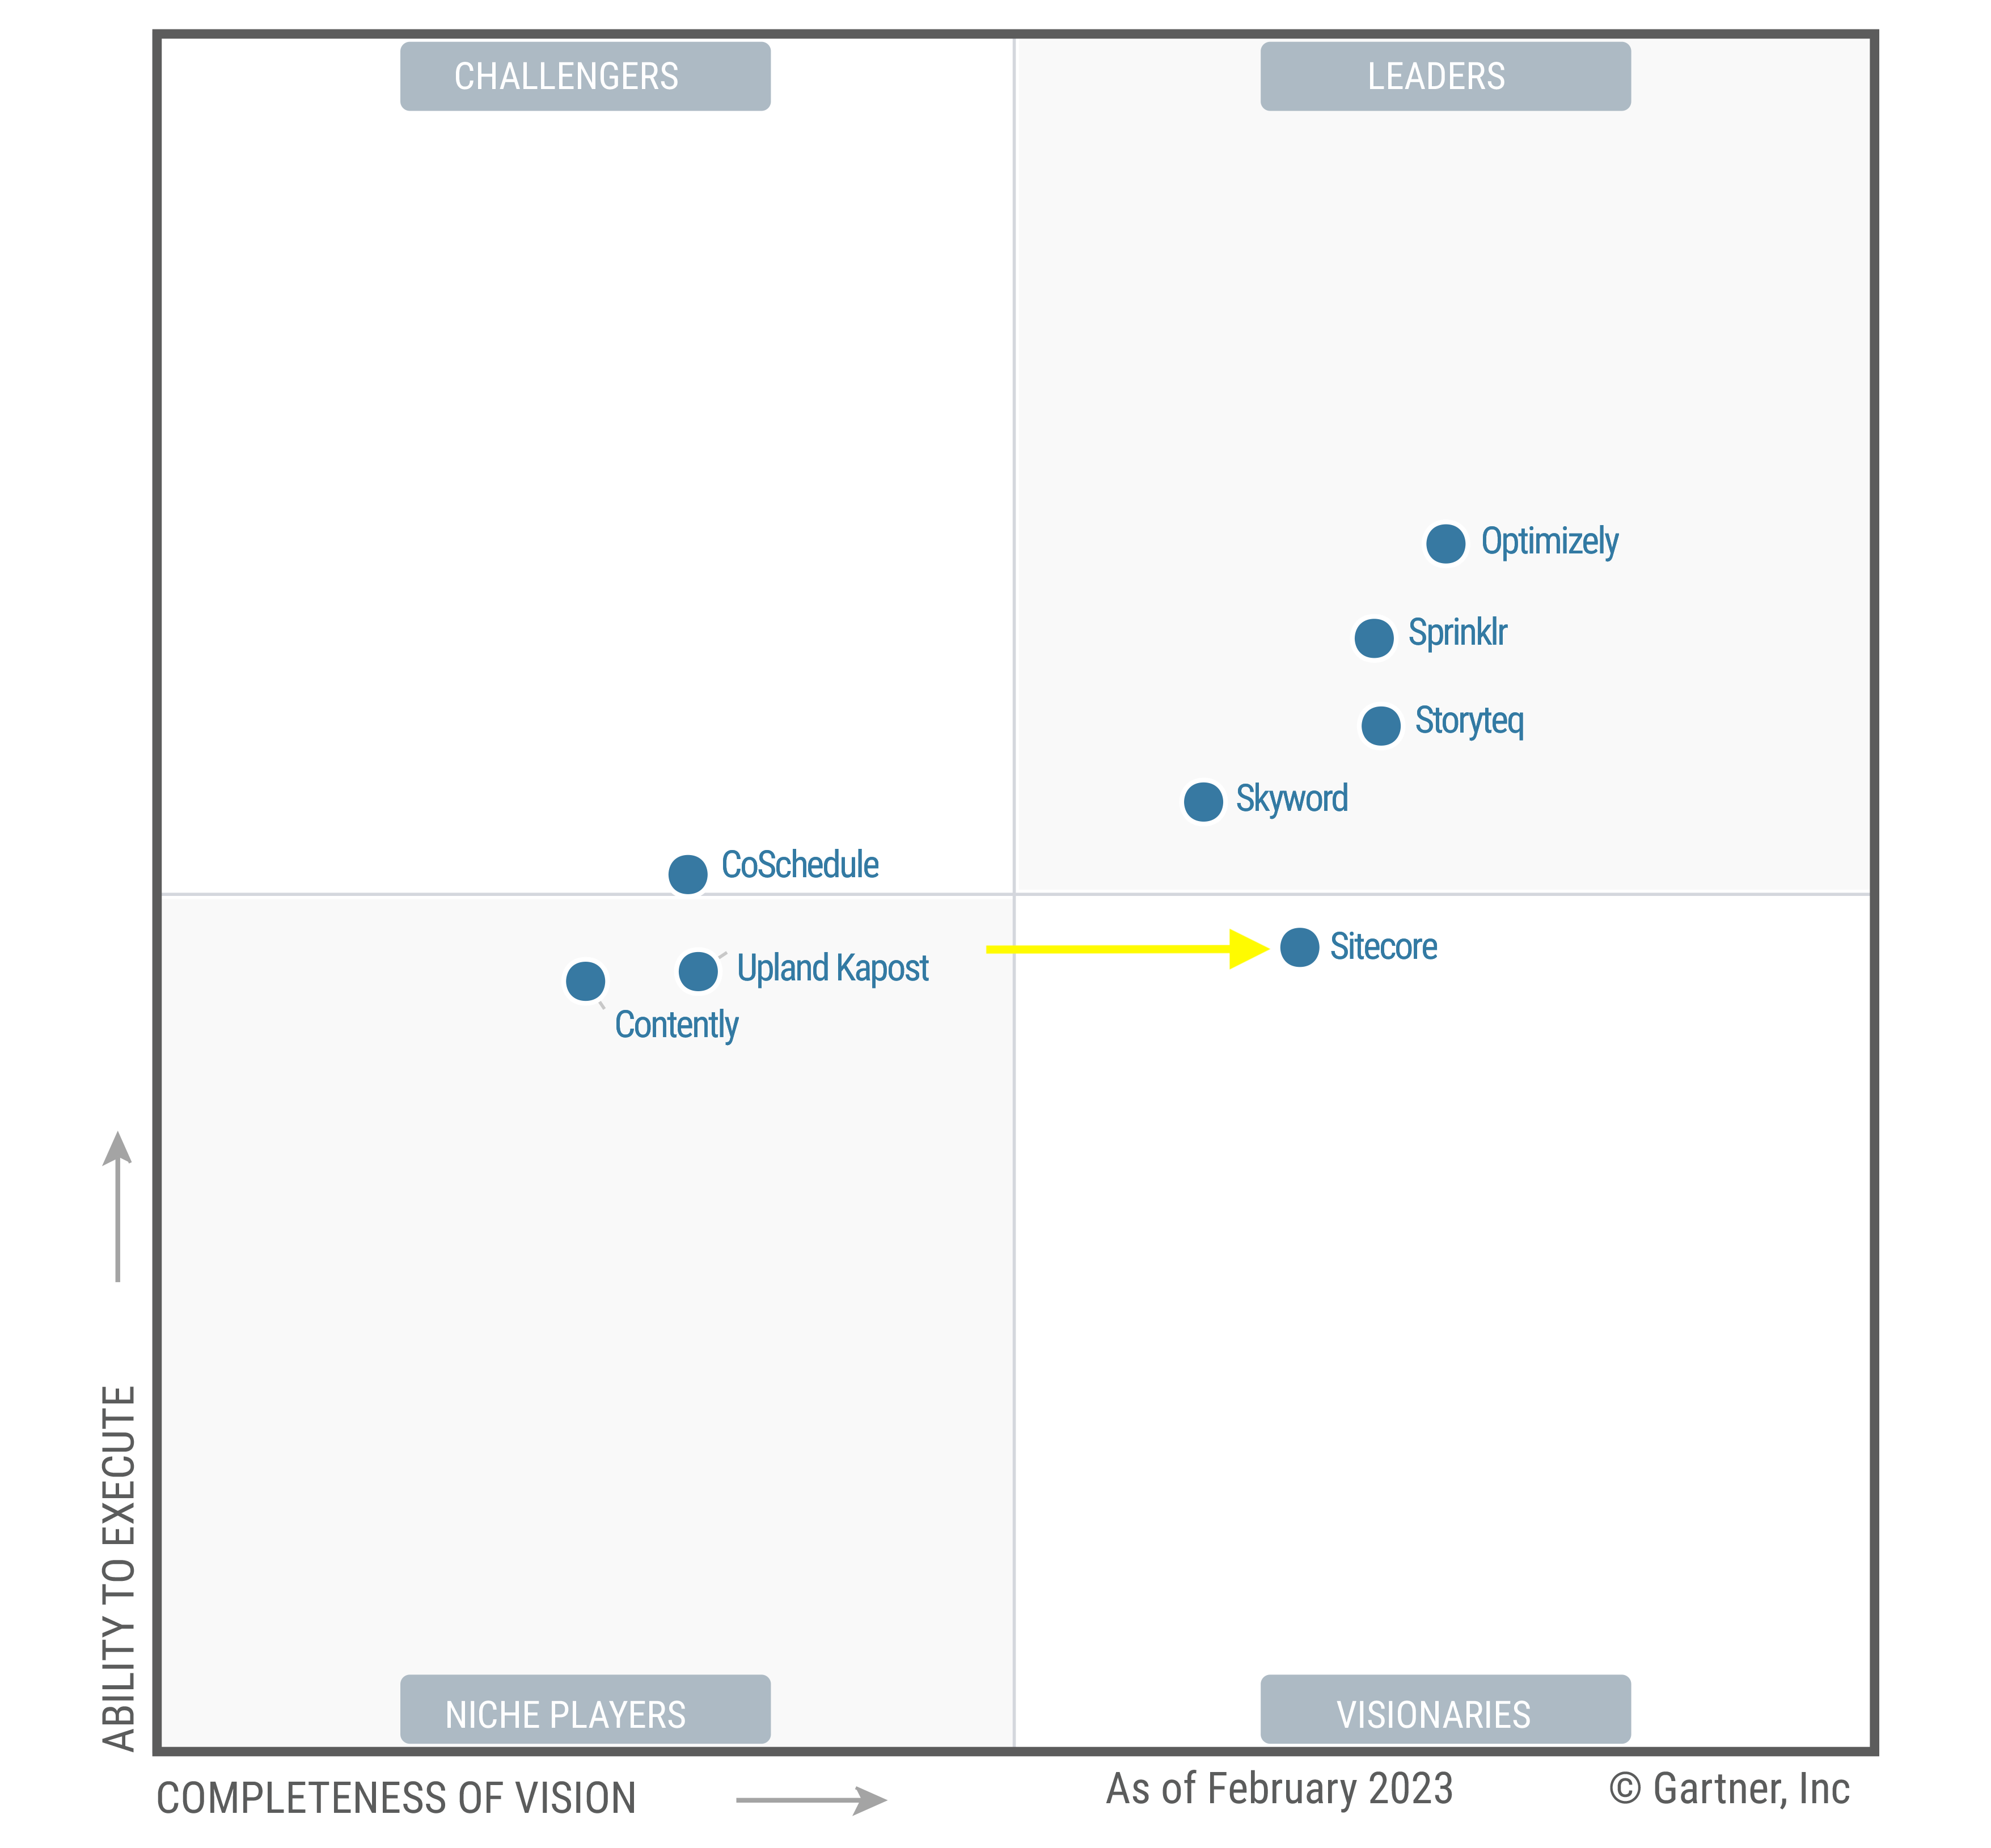 Sitecore is a Visionary in Gartner's Magic Quadrant in 2023 for Content Marketing Platforms.